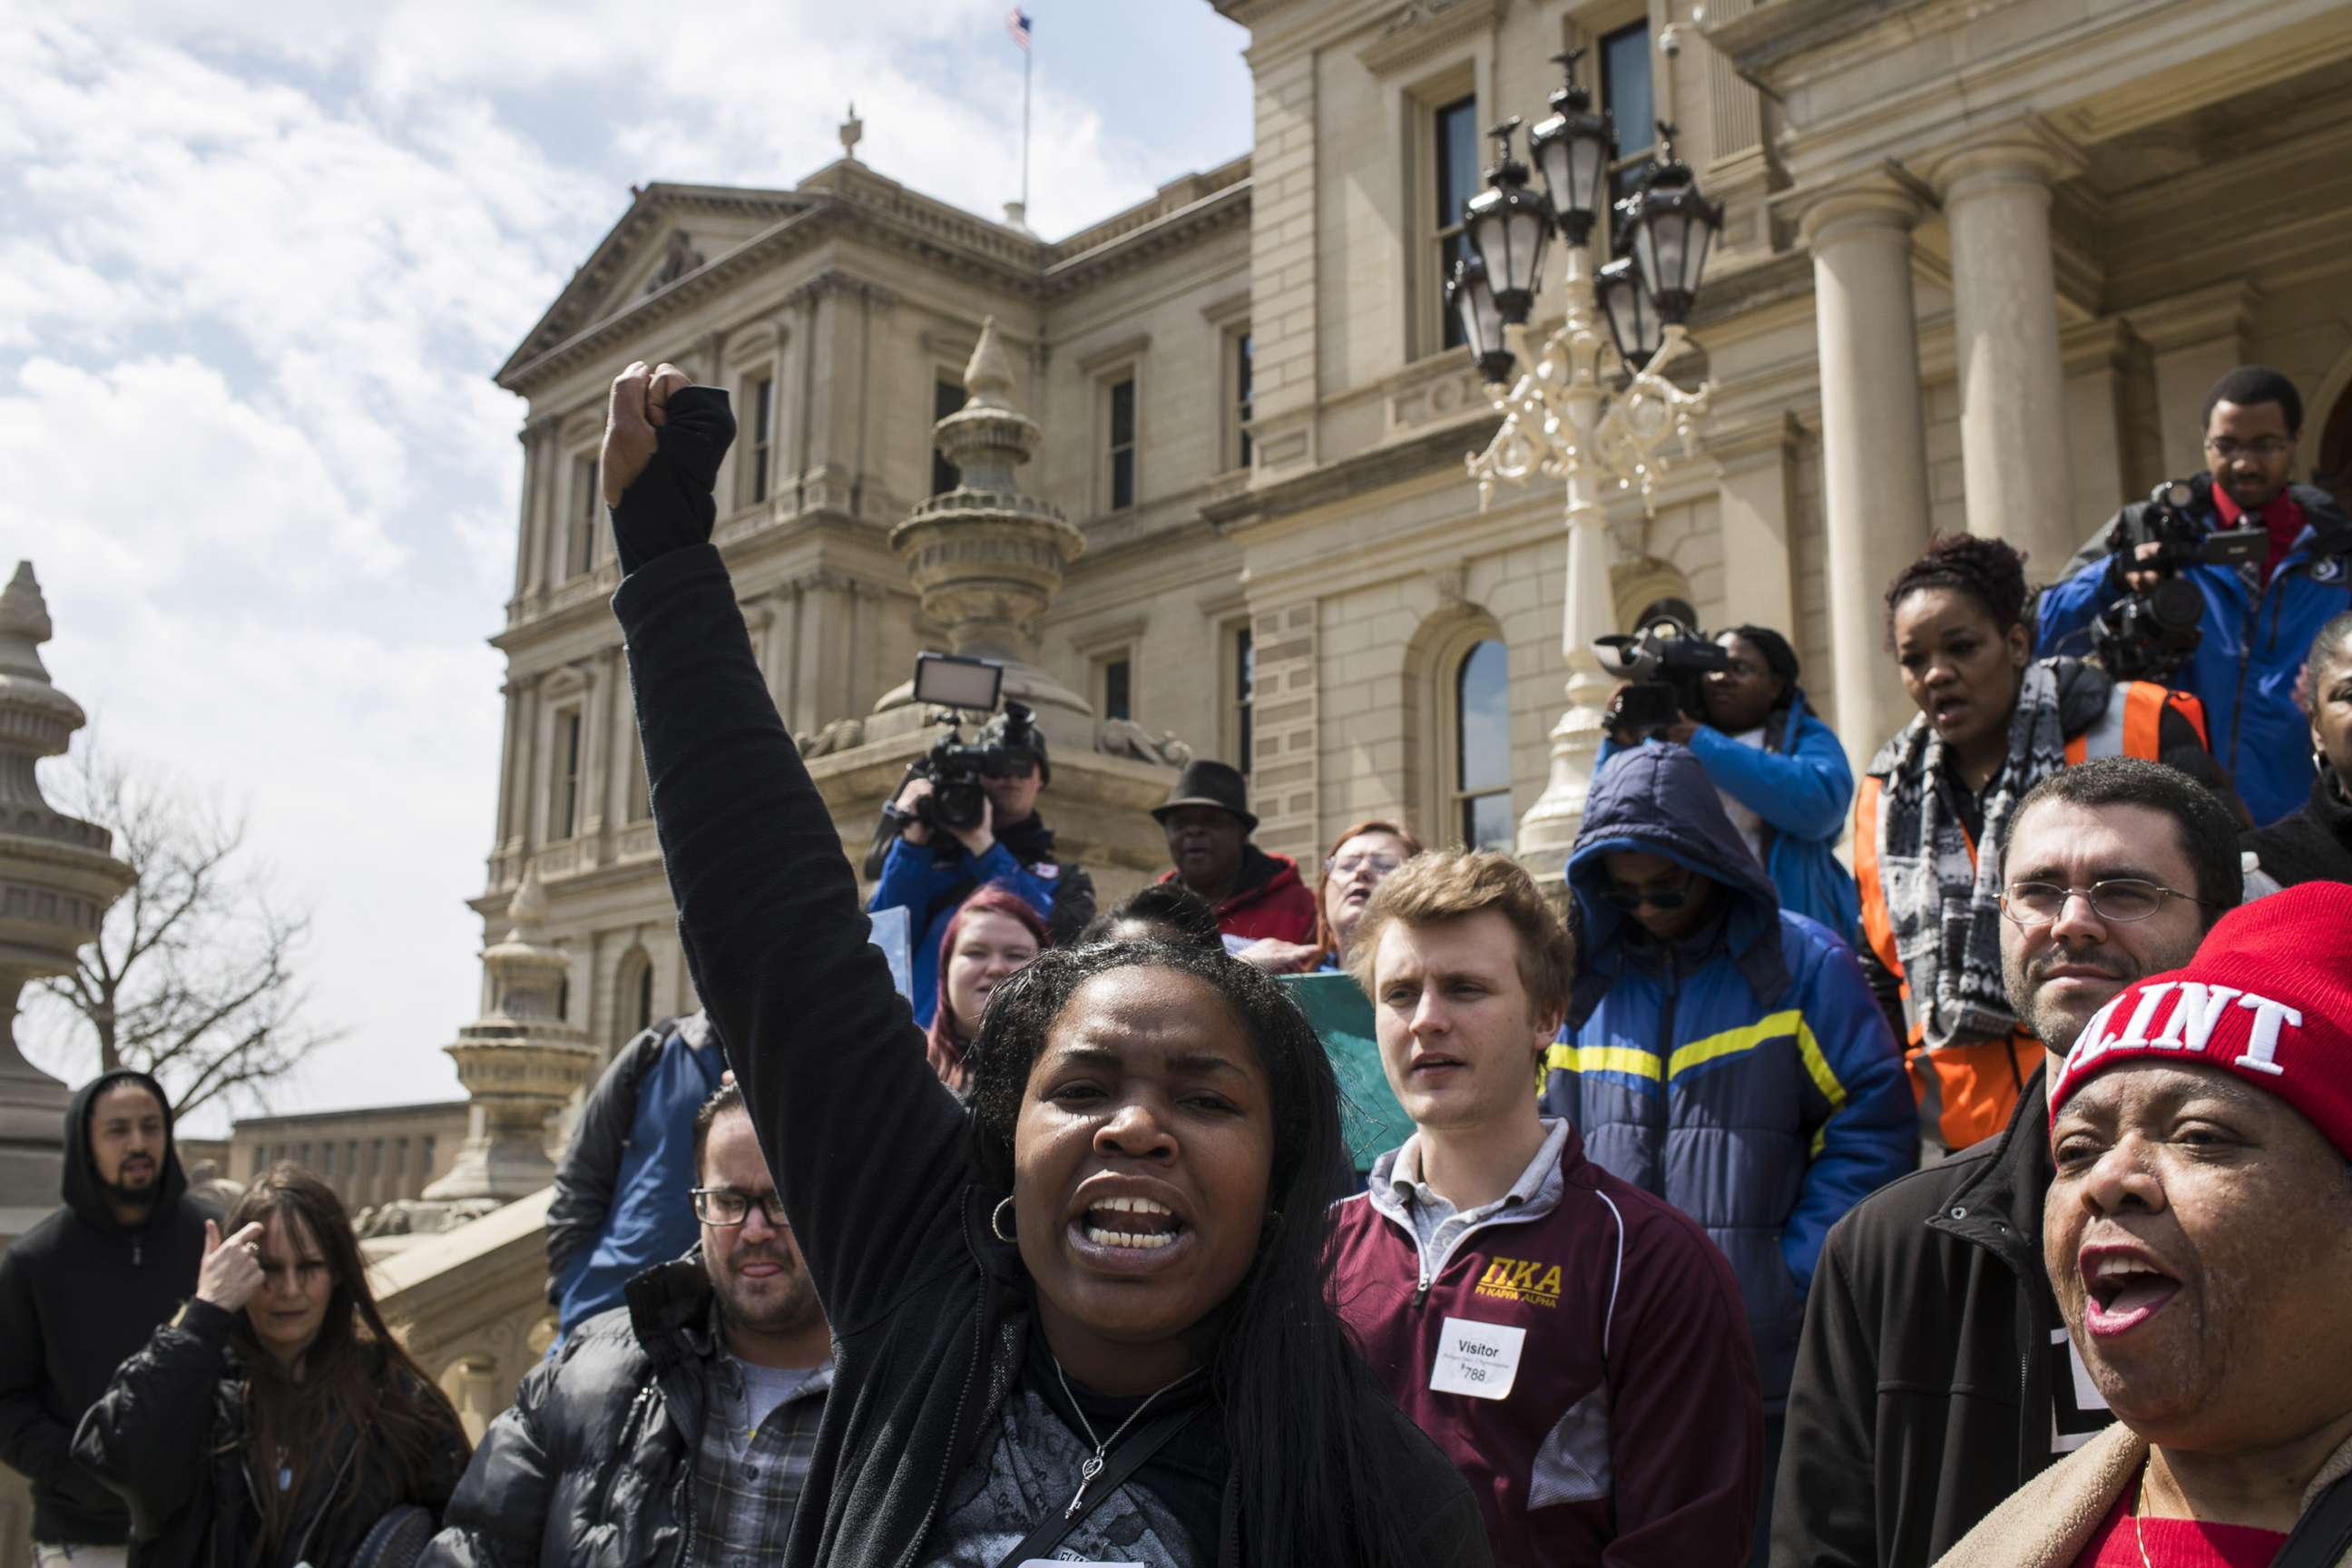 PHOTO: Ariana Hawk of Flint, Michigan, leads a chant during a protest on the steps of the Michigan State Capitol on April 11, 2018 in Lansing, Michigan.